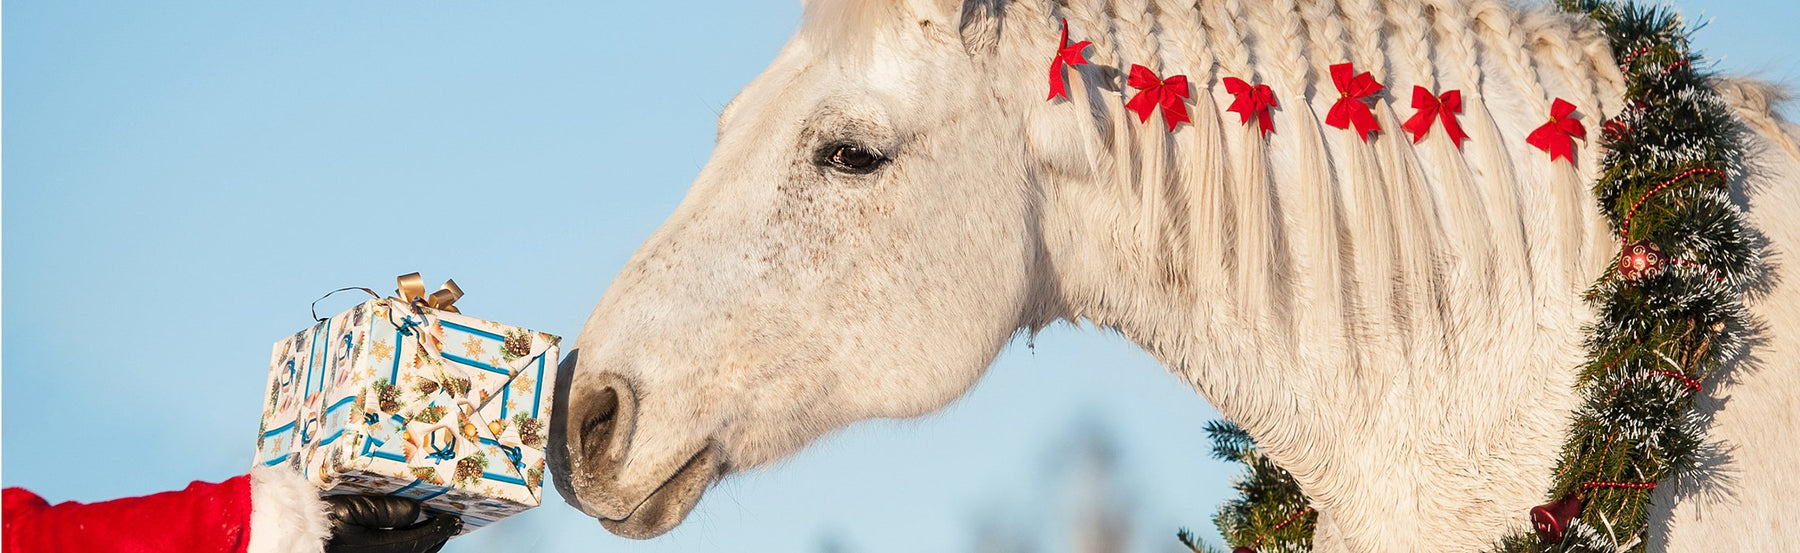 10 Holiday Gifts for Equestrians in 2020